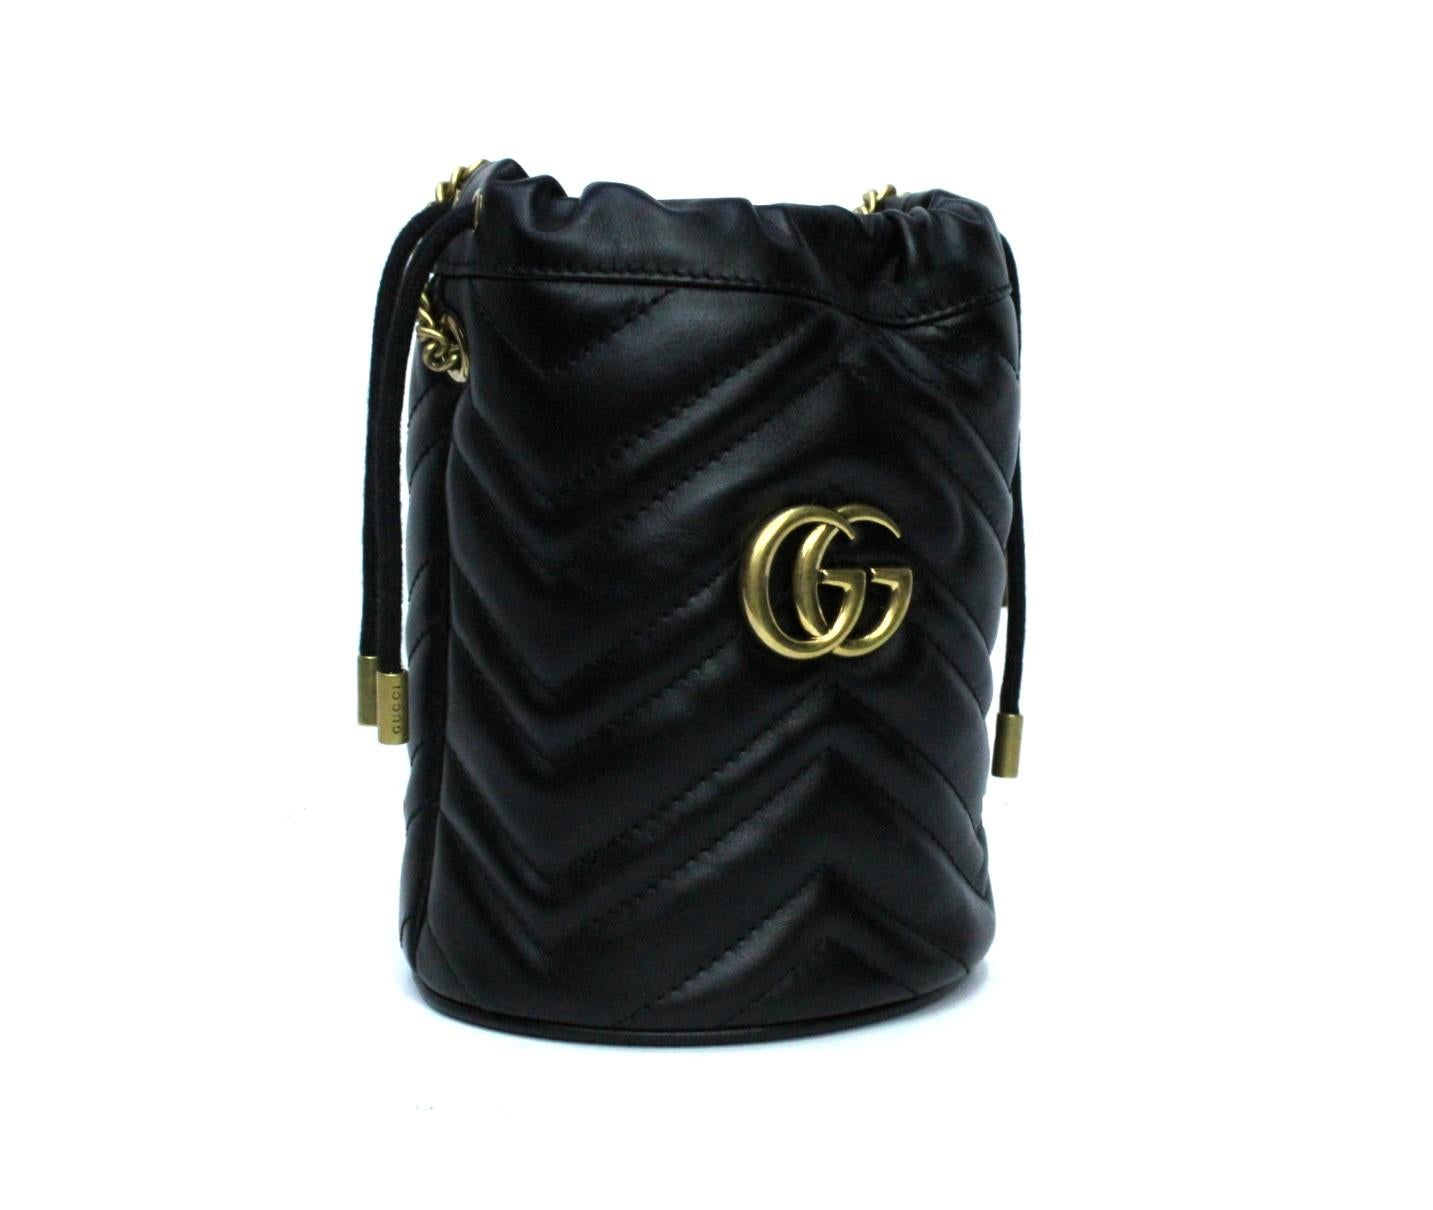 Gucci marmont mini bag in bucket made of black matelassé leather with Chevron pattern. Versatile and comfortable, it has a drawstring closure, a long chain so as to wear it on the shoulder or shoulder strap. Antique gold hardware. Very good